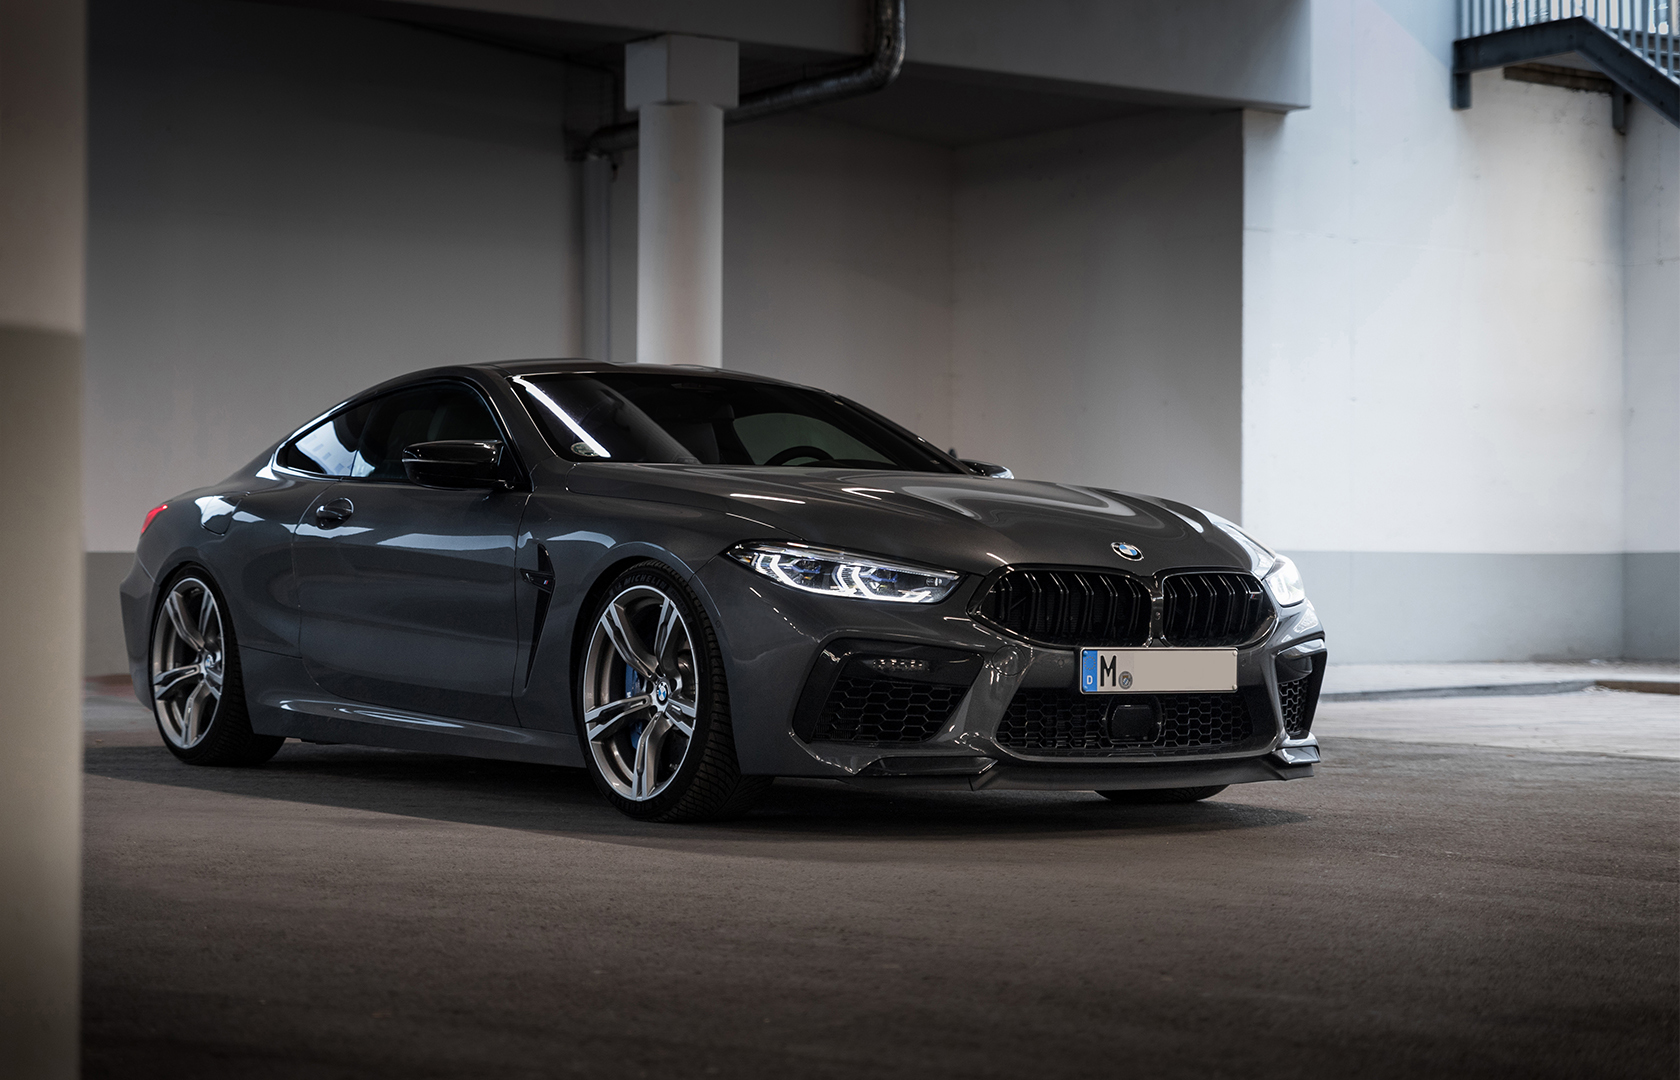 Bmw 8 competition. BMW m8 Competition черная. БМВ m8 Competition 2021. BMW m8 Competition 2021 черная. BMW m8 Competition Coupe 2021.